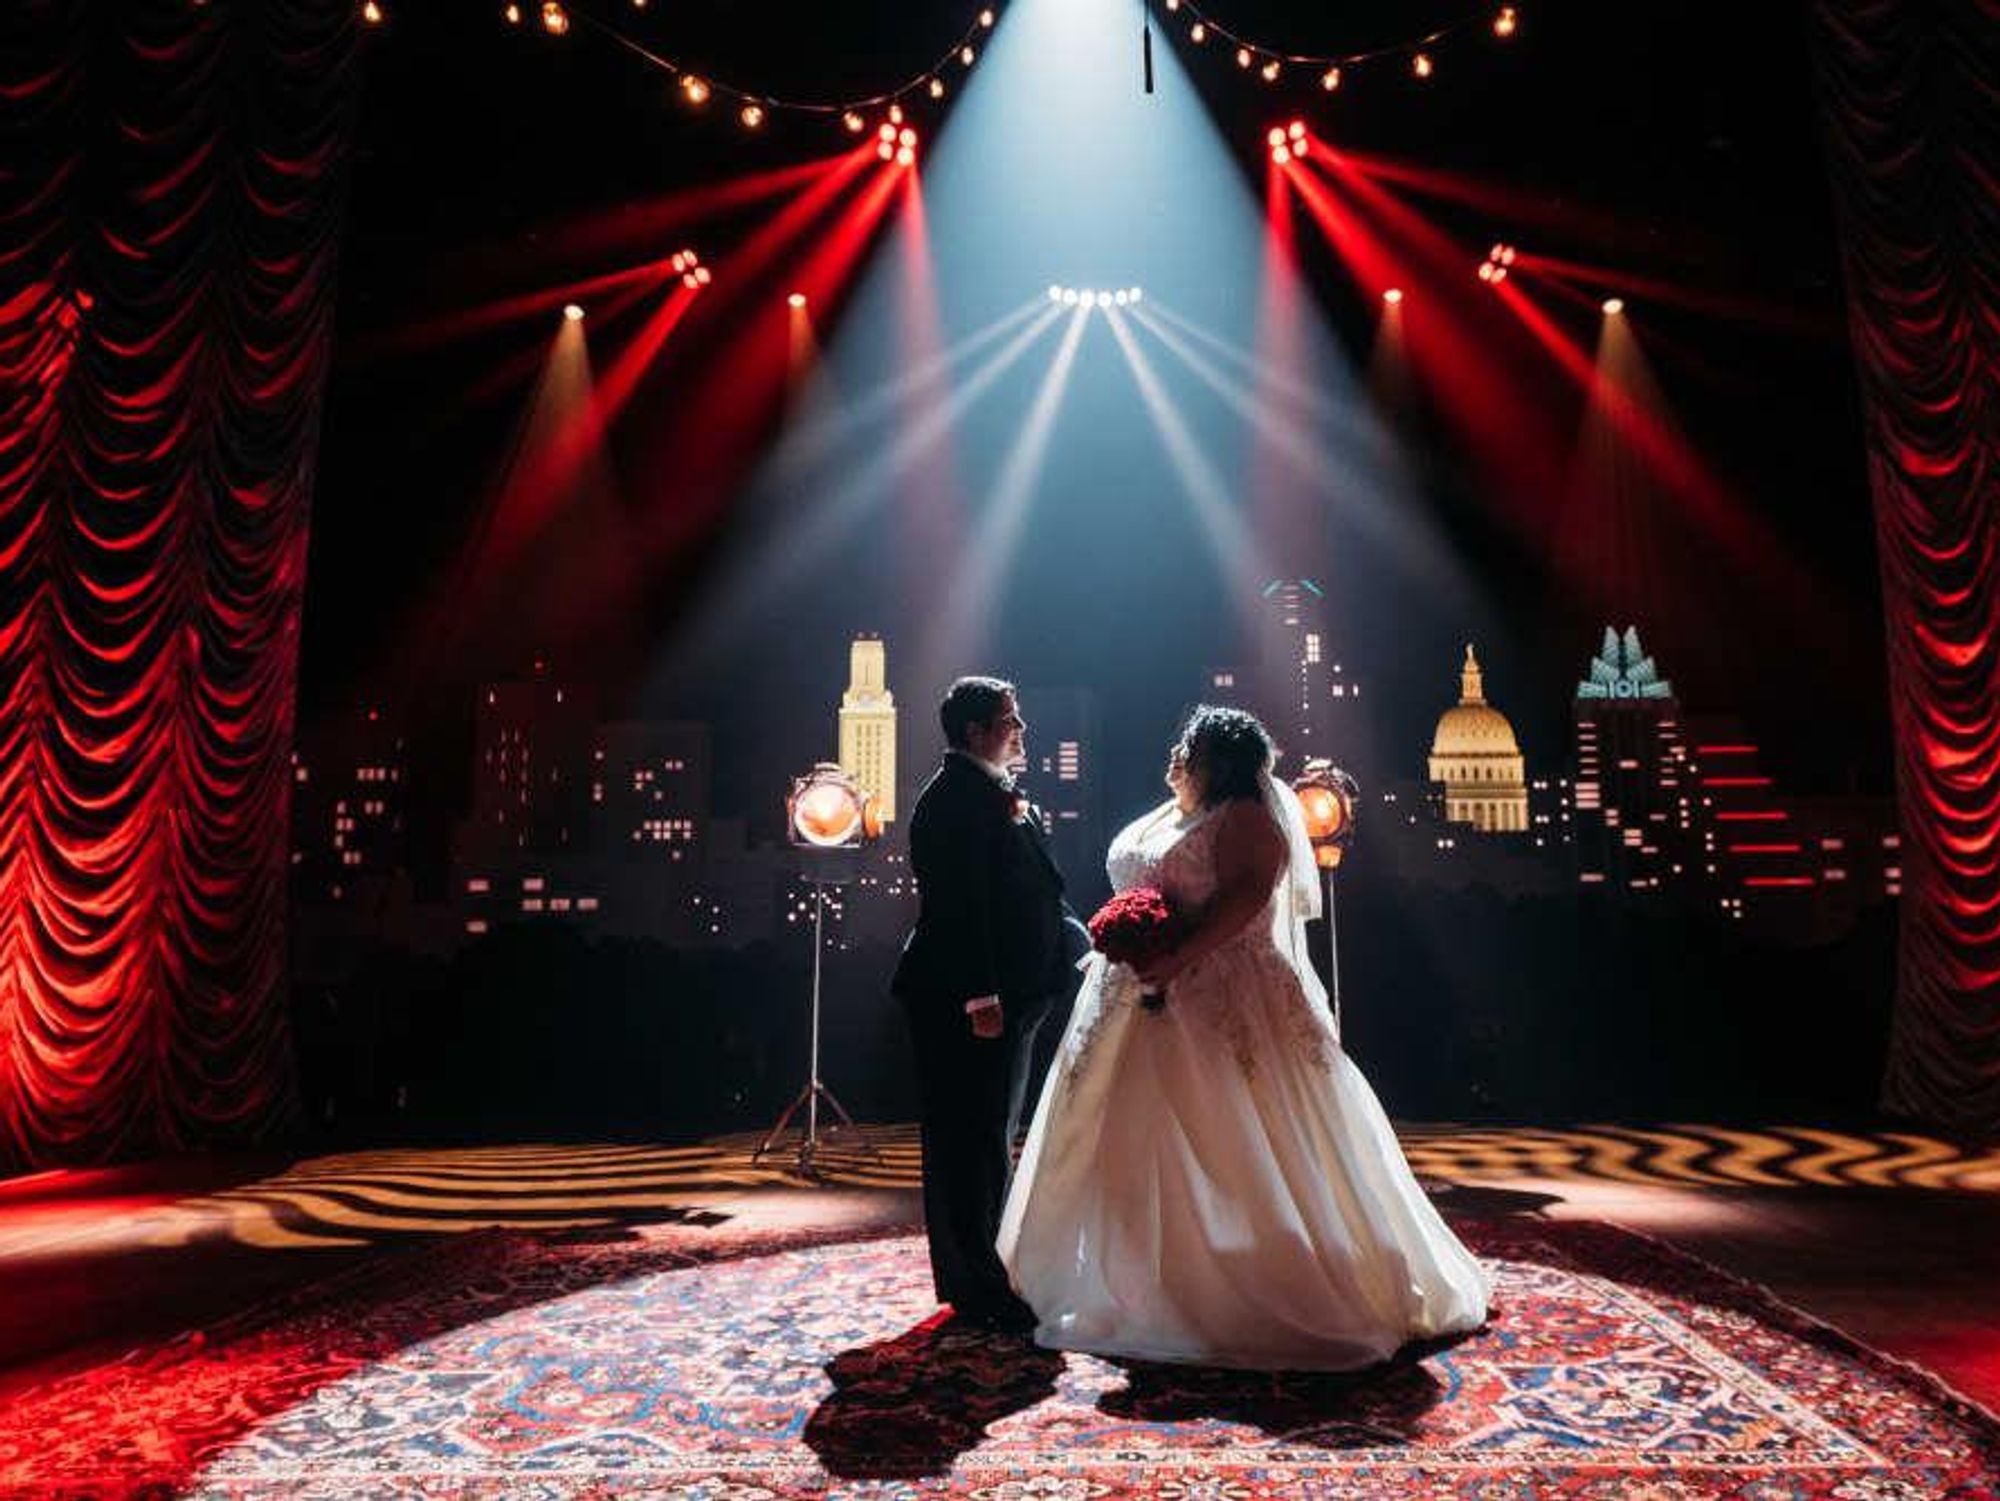 A couple stands smiling at each other in a wedding dress and tuxedo, in front of red curtains and the recognizable skyline backdrop at Austin City Limits Live.